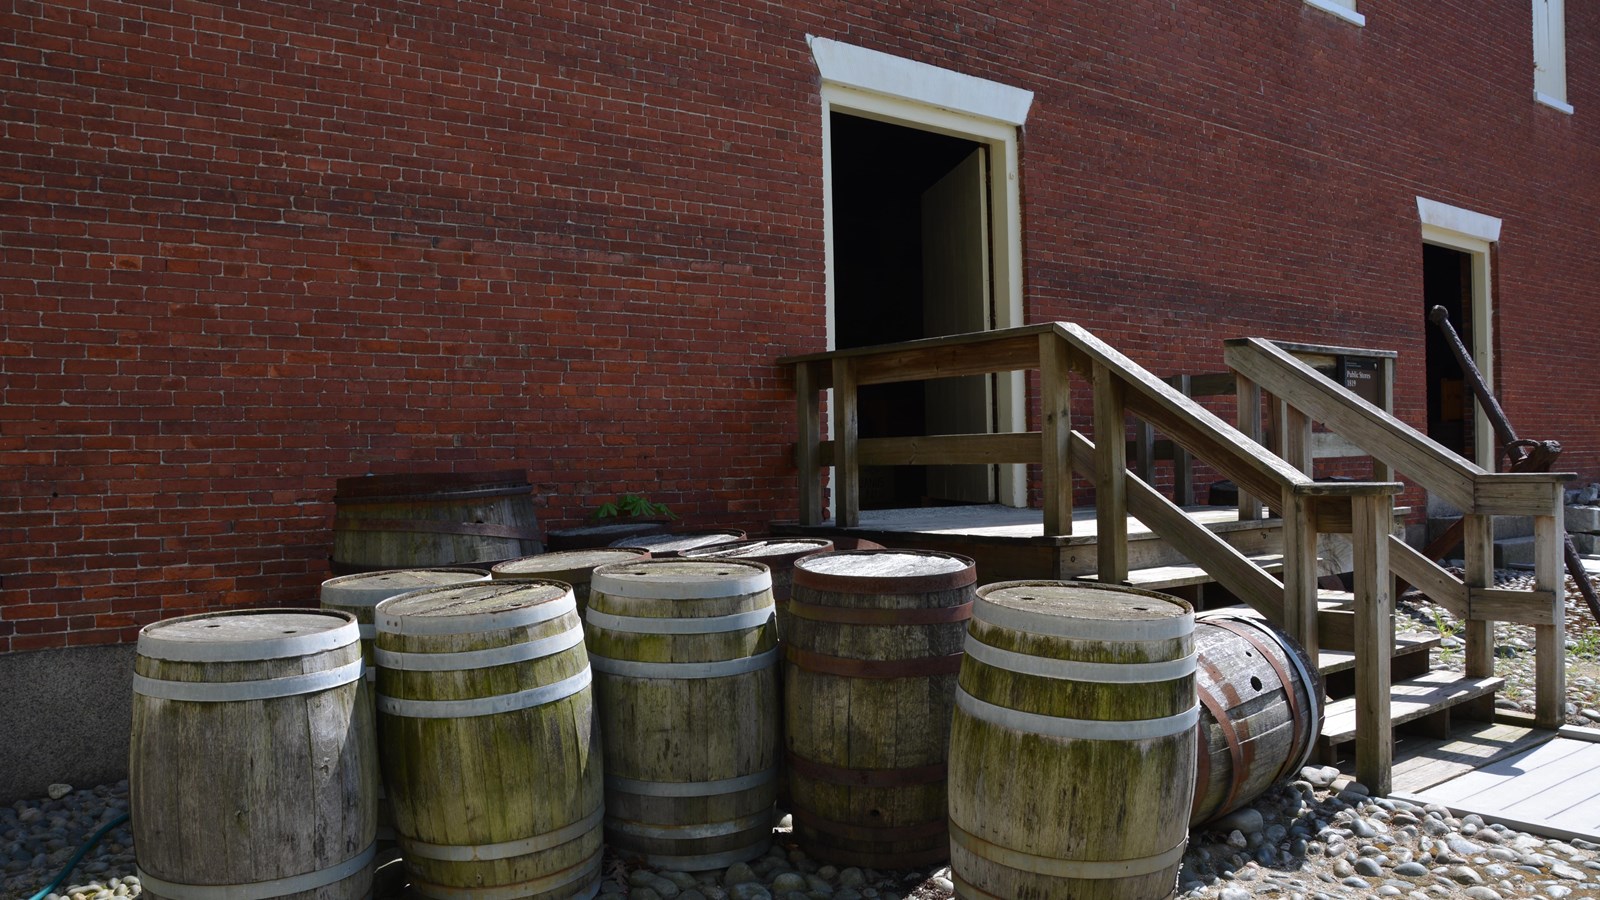 Brick building with wooden steps leading to entrance that is surrounded by barrels